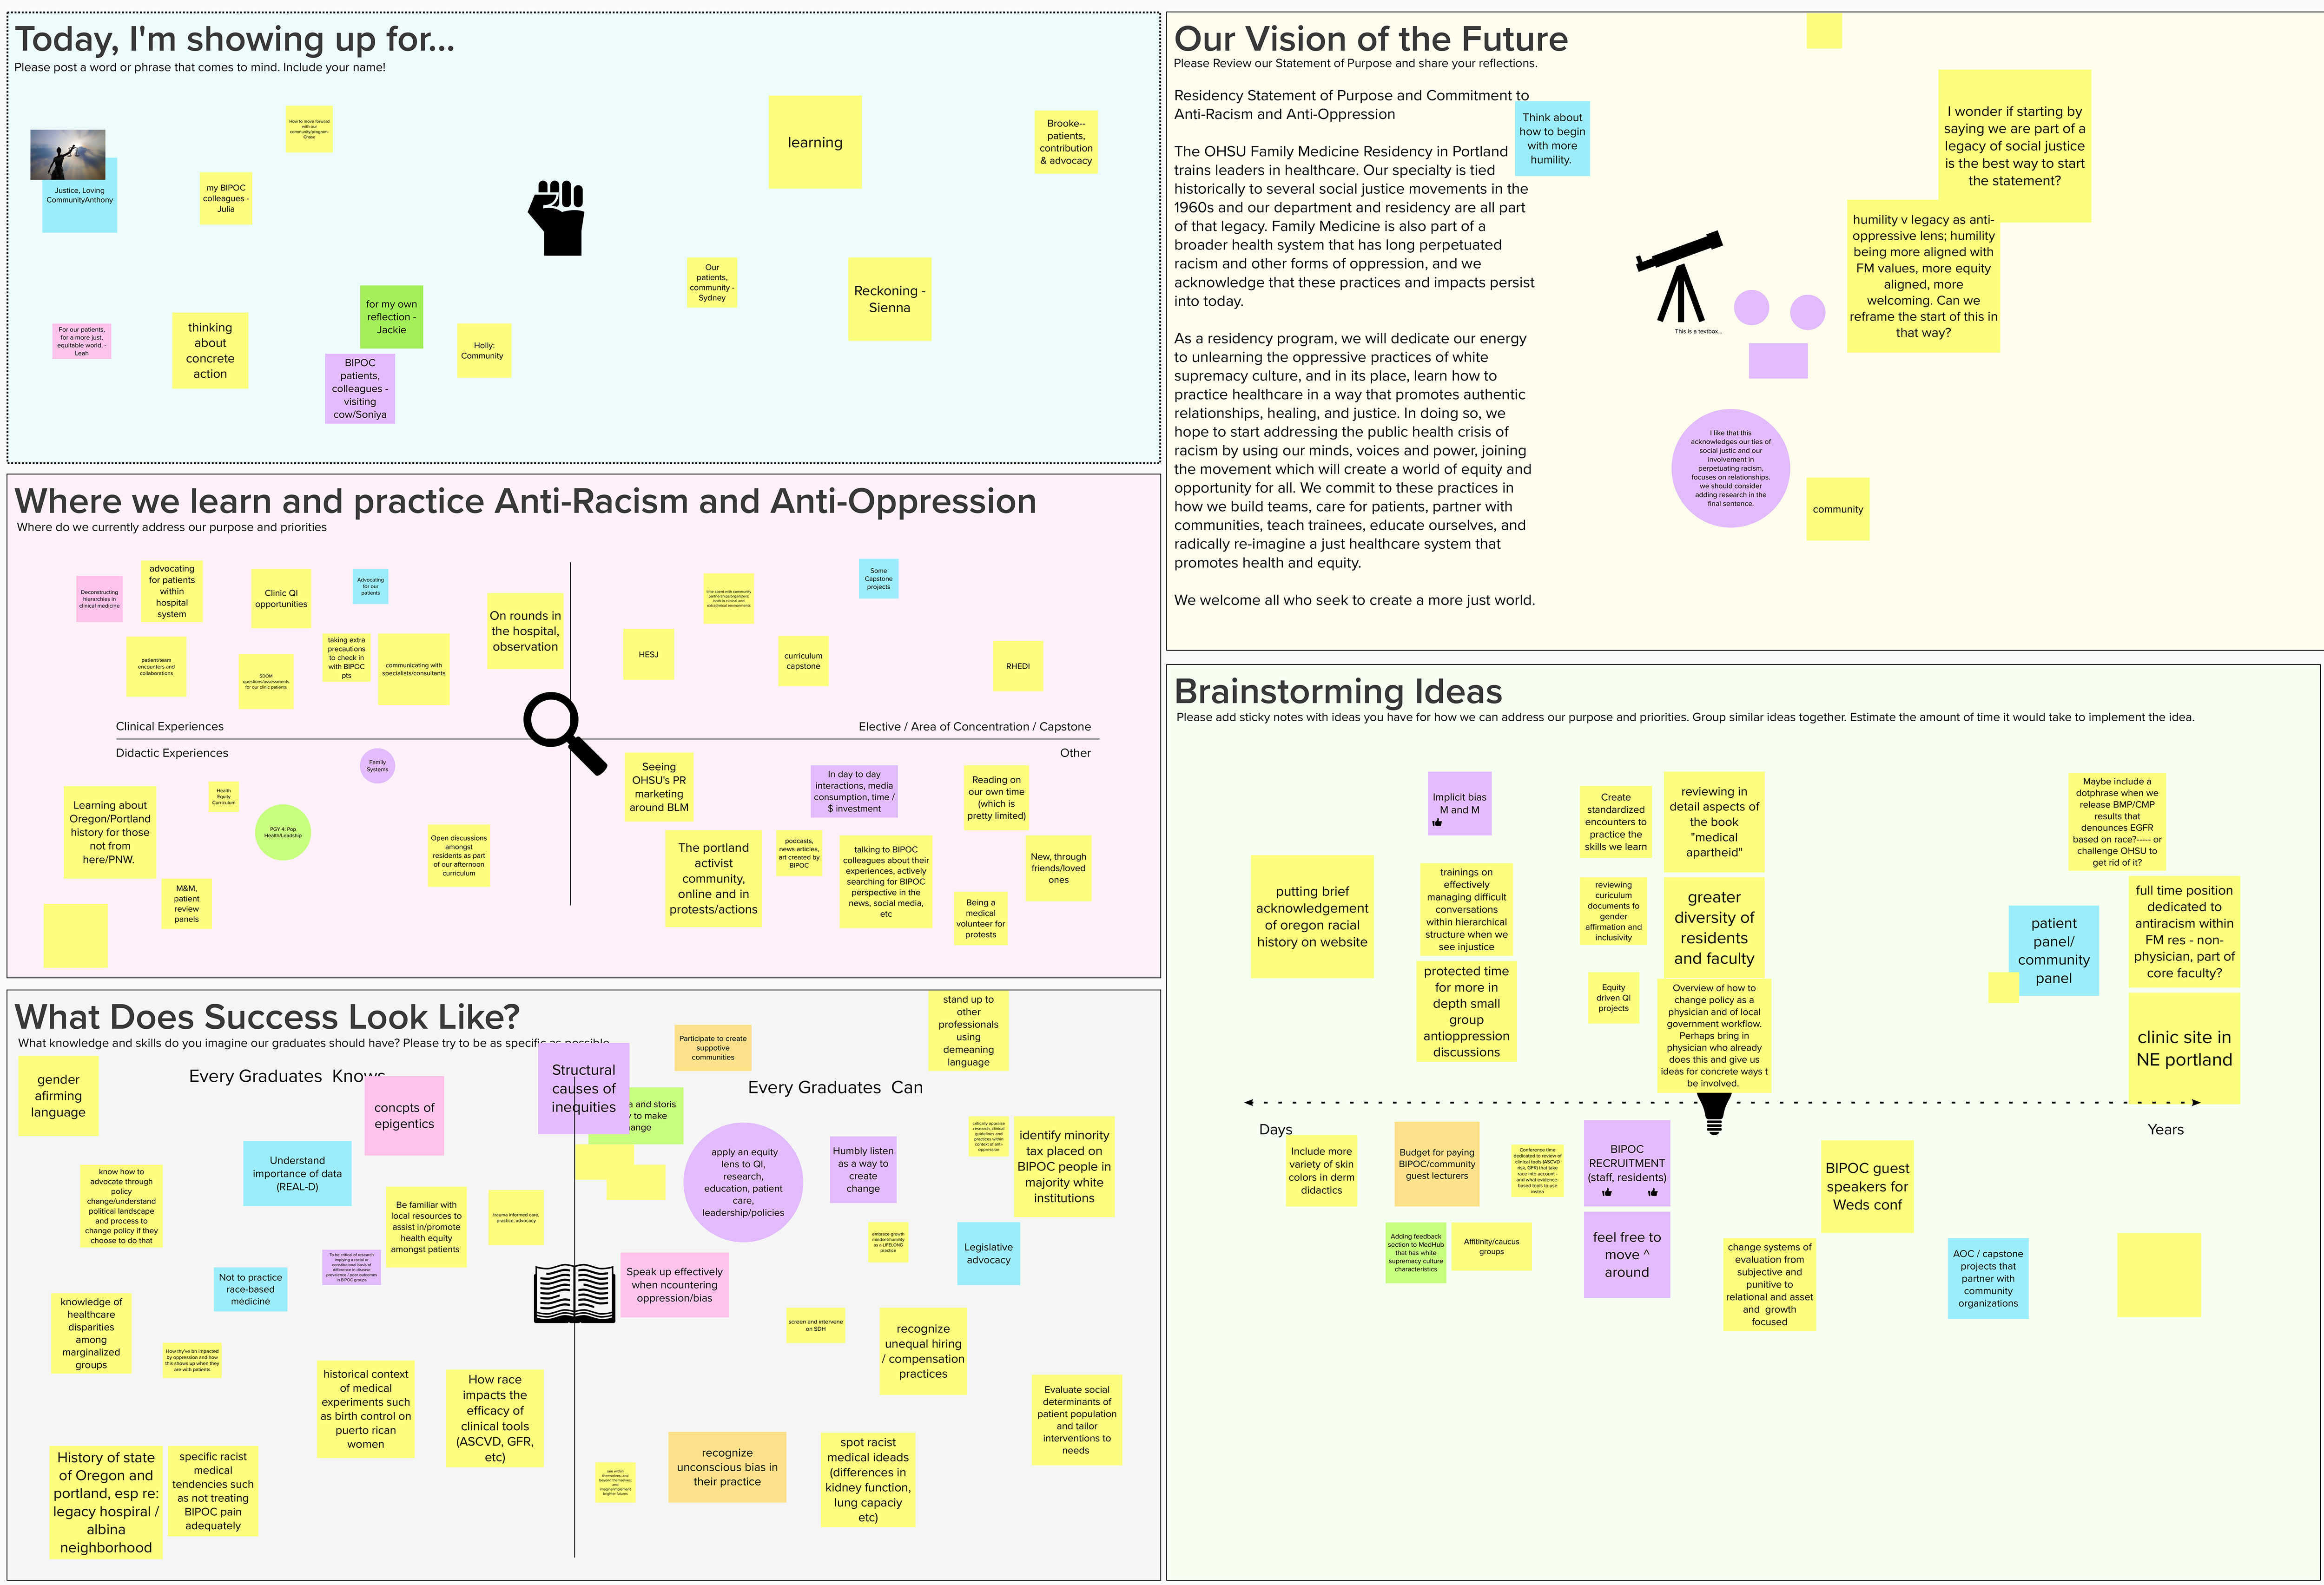 A virtual whiteboard of sticky notes with ideas for the future